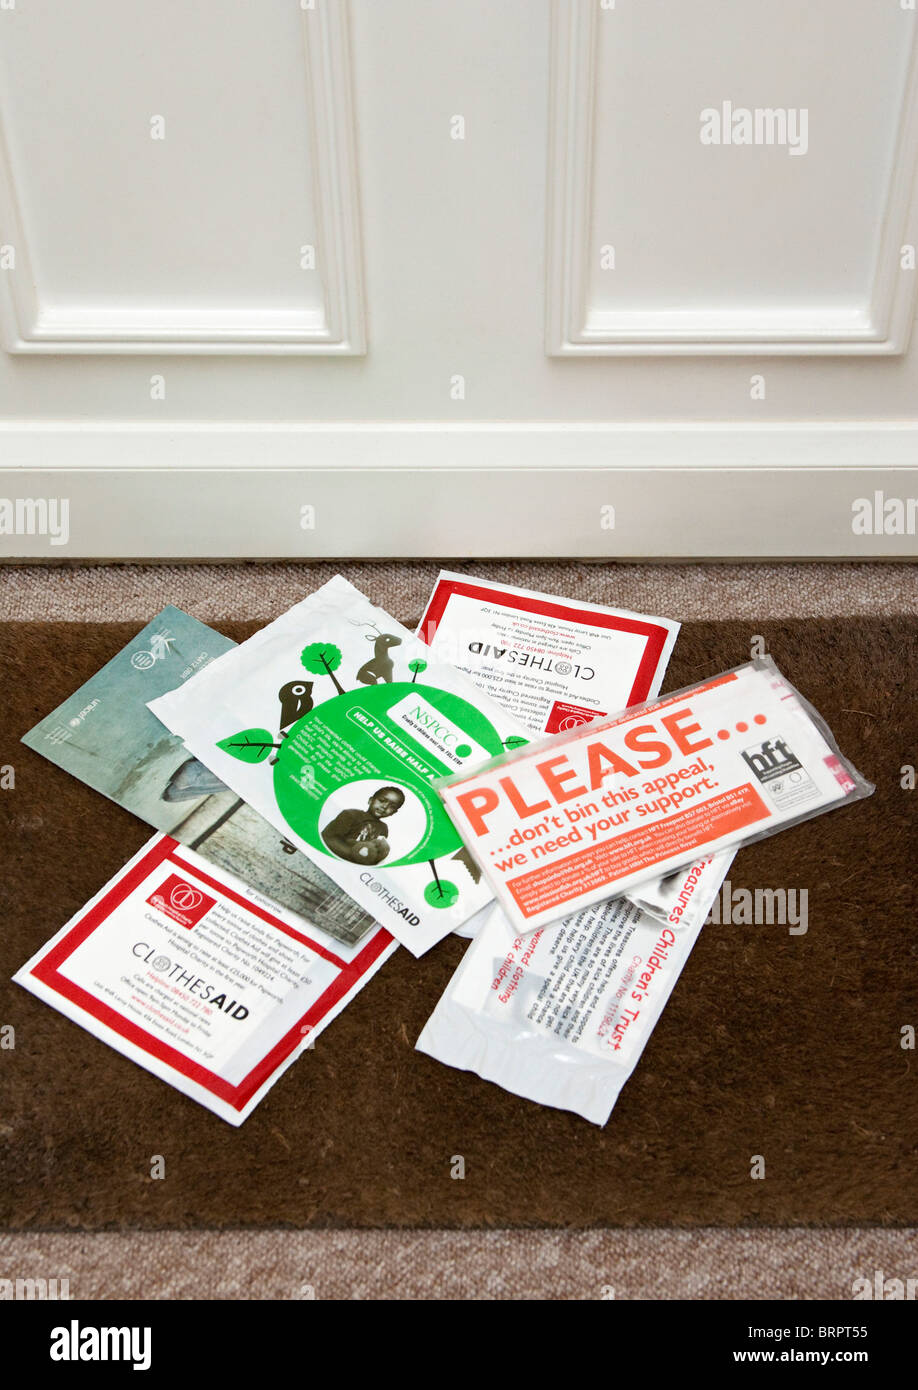 junk mail delivered through letterbox on doormat Stock Photo